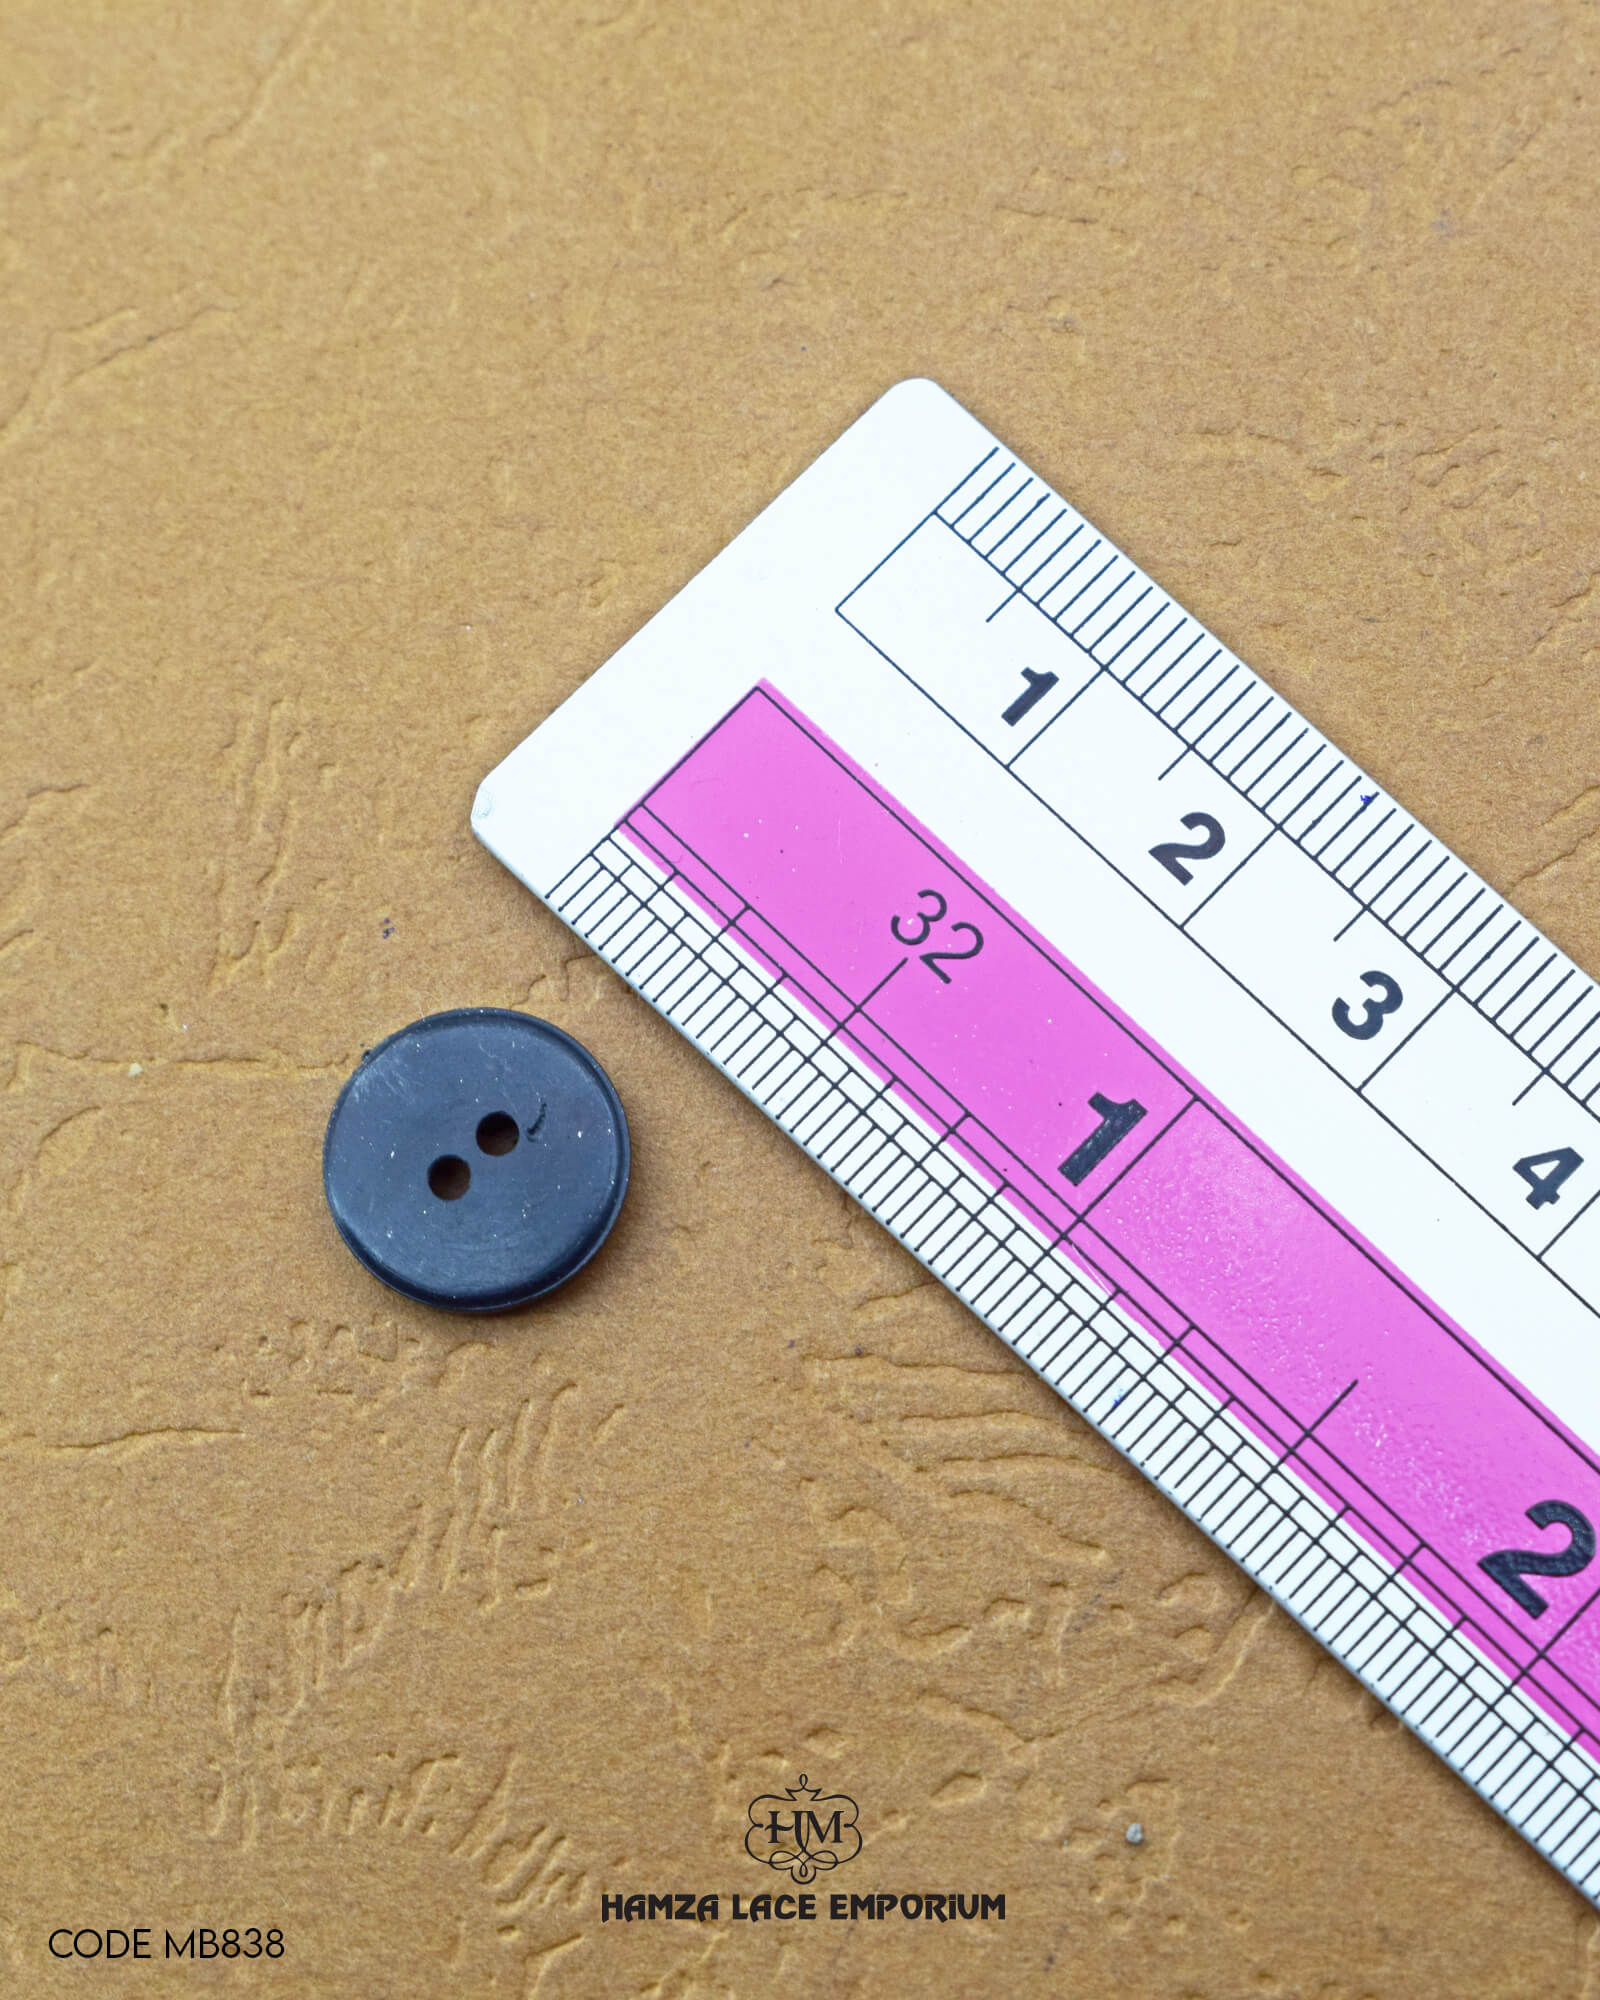 the size of the '4 Hole Plastic Button MB838' is shown using a ruler